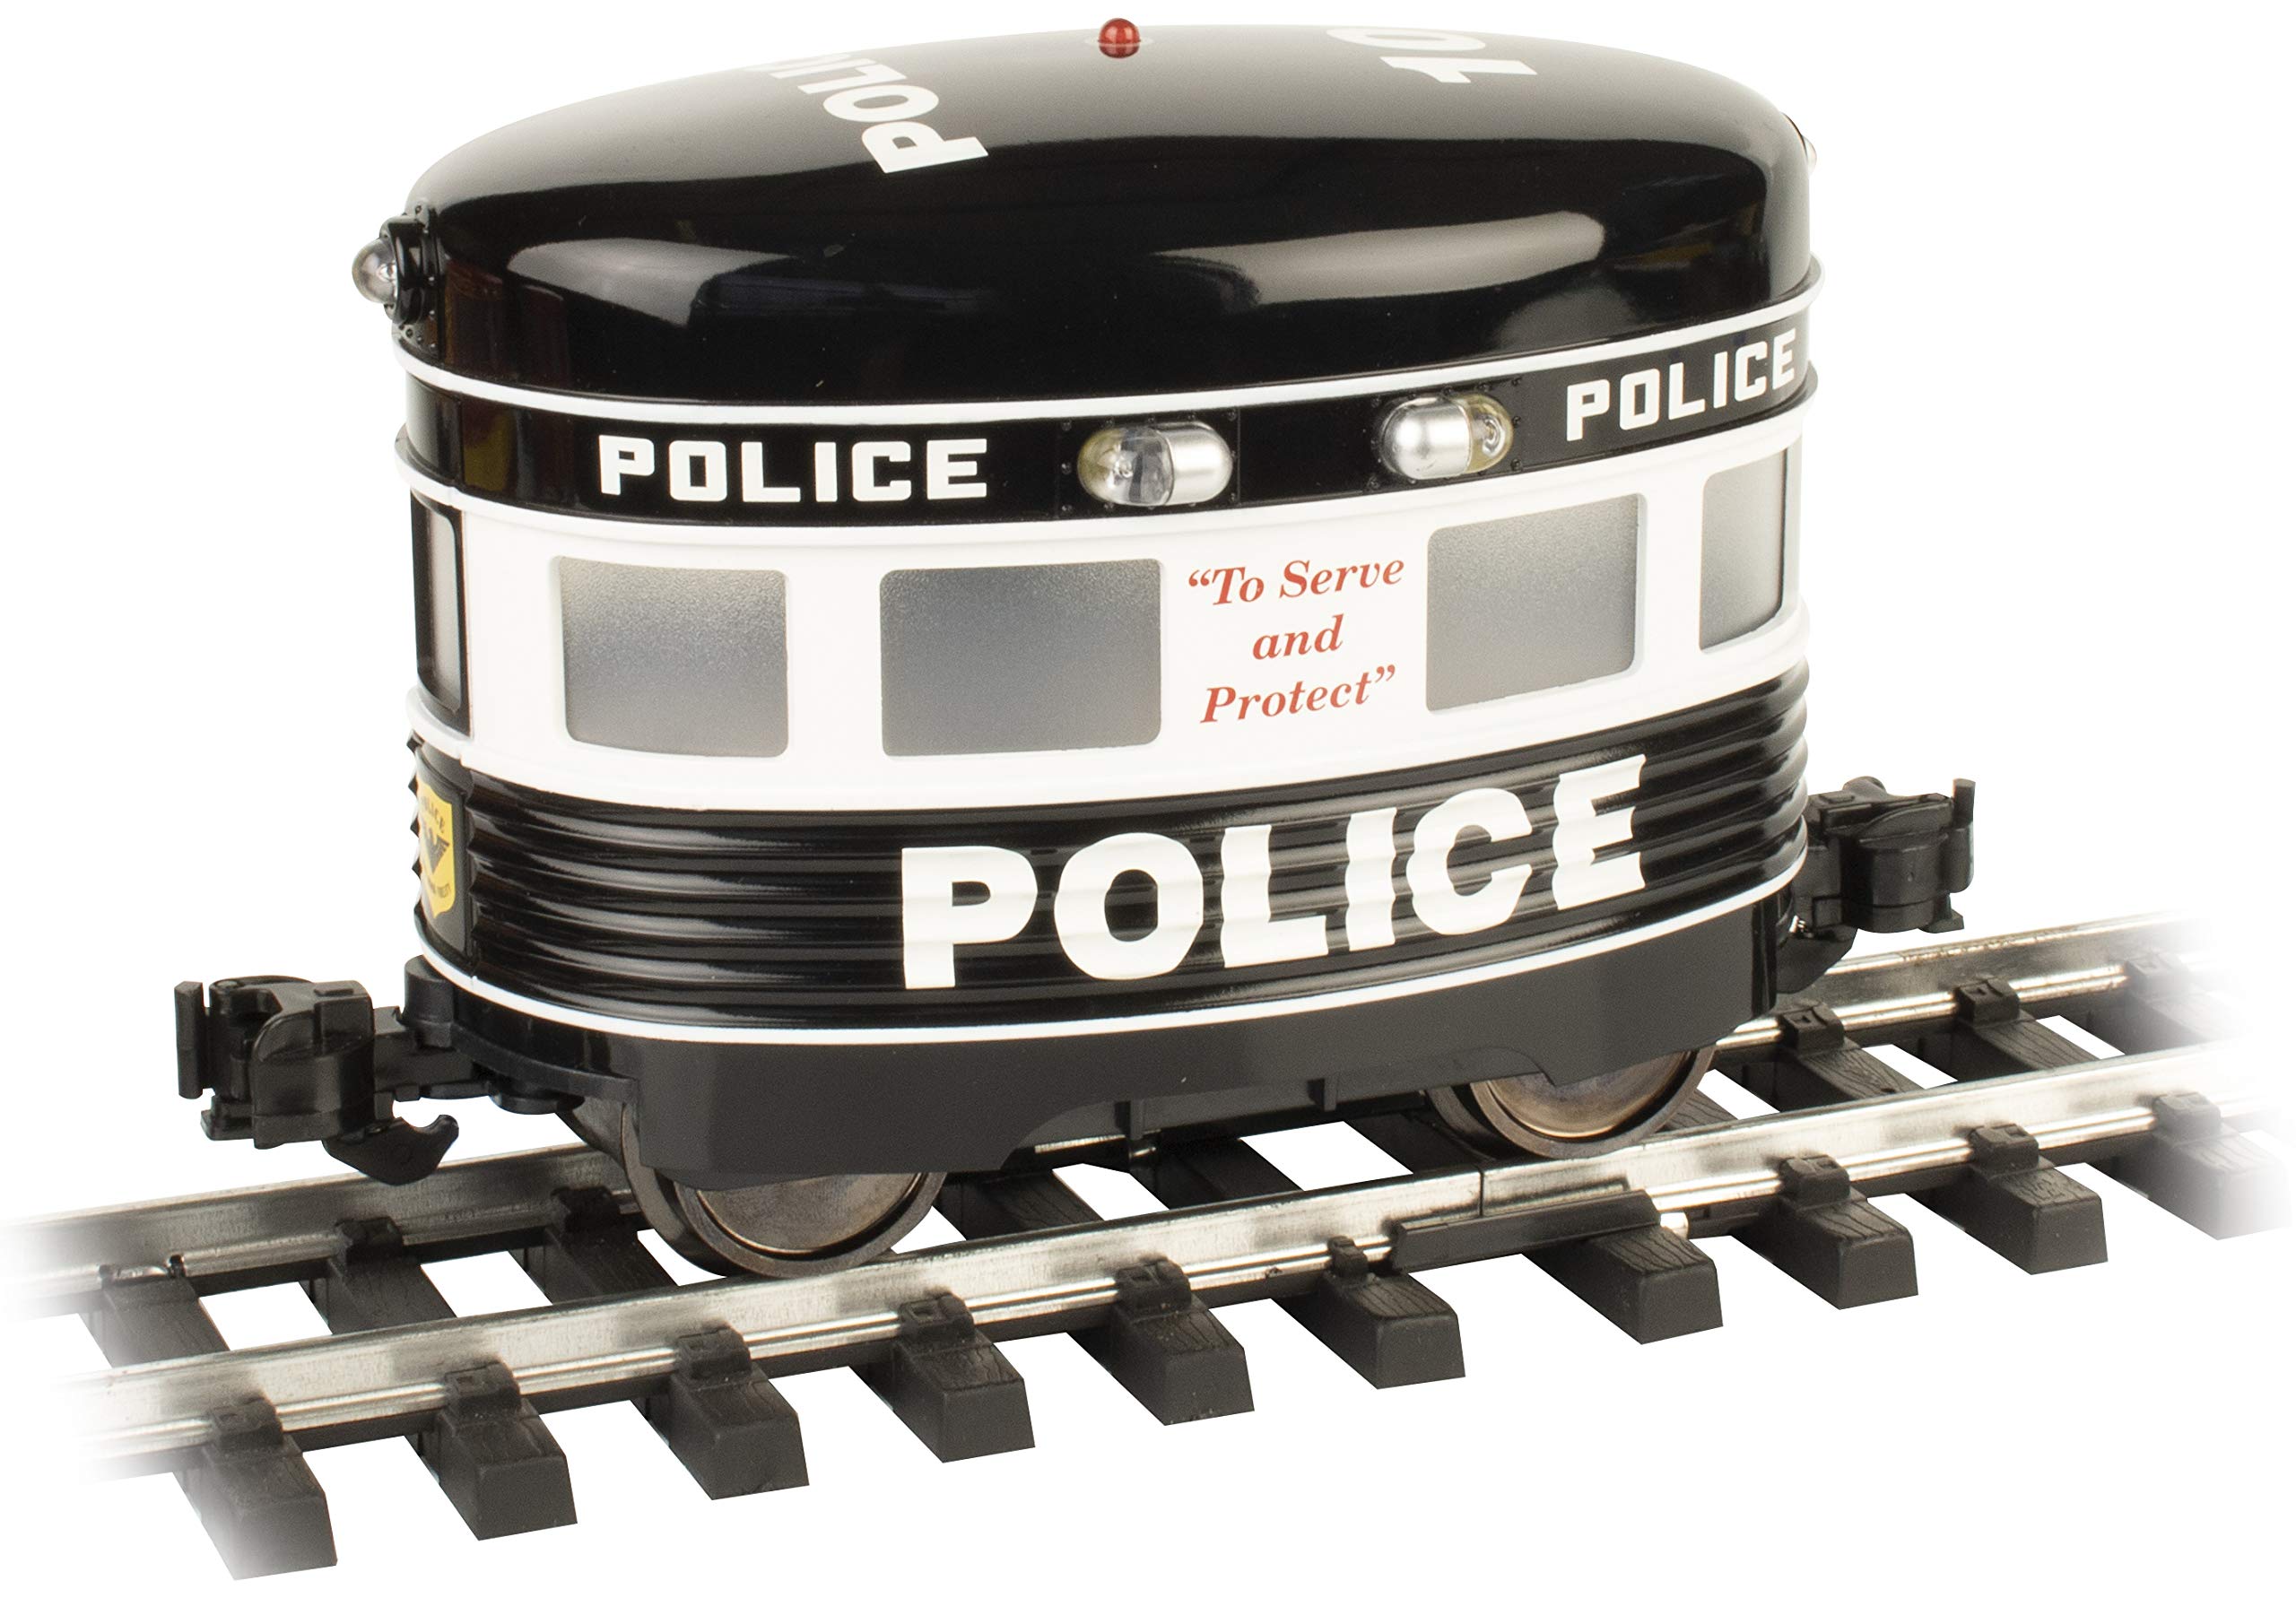 Bachmann Trains - EGGLINER Powered Track Vehicle - Police - Large G Scale (96286)